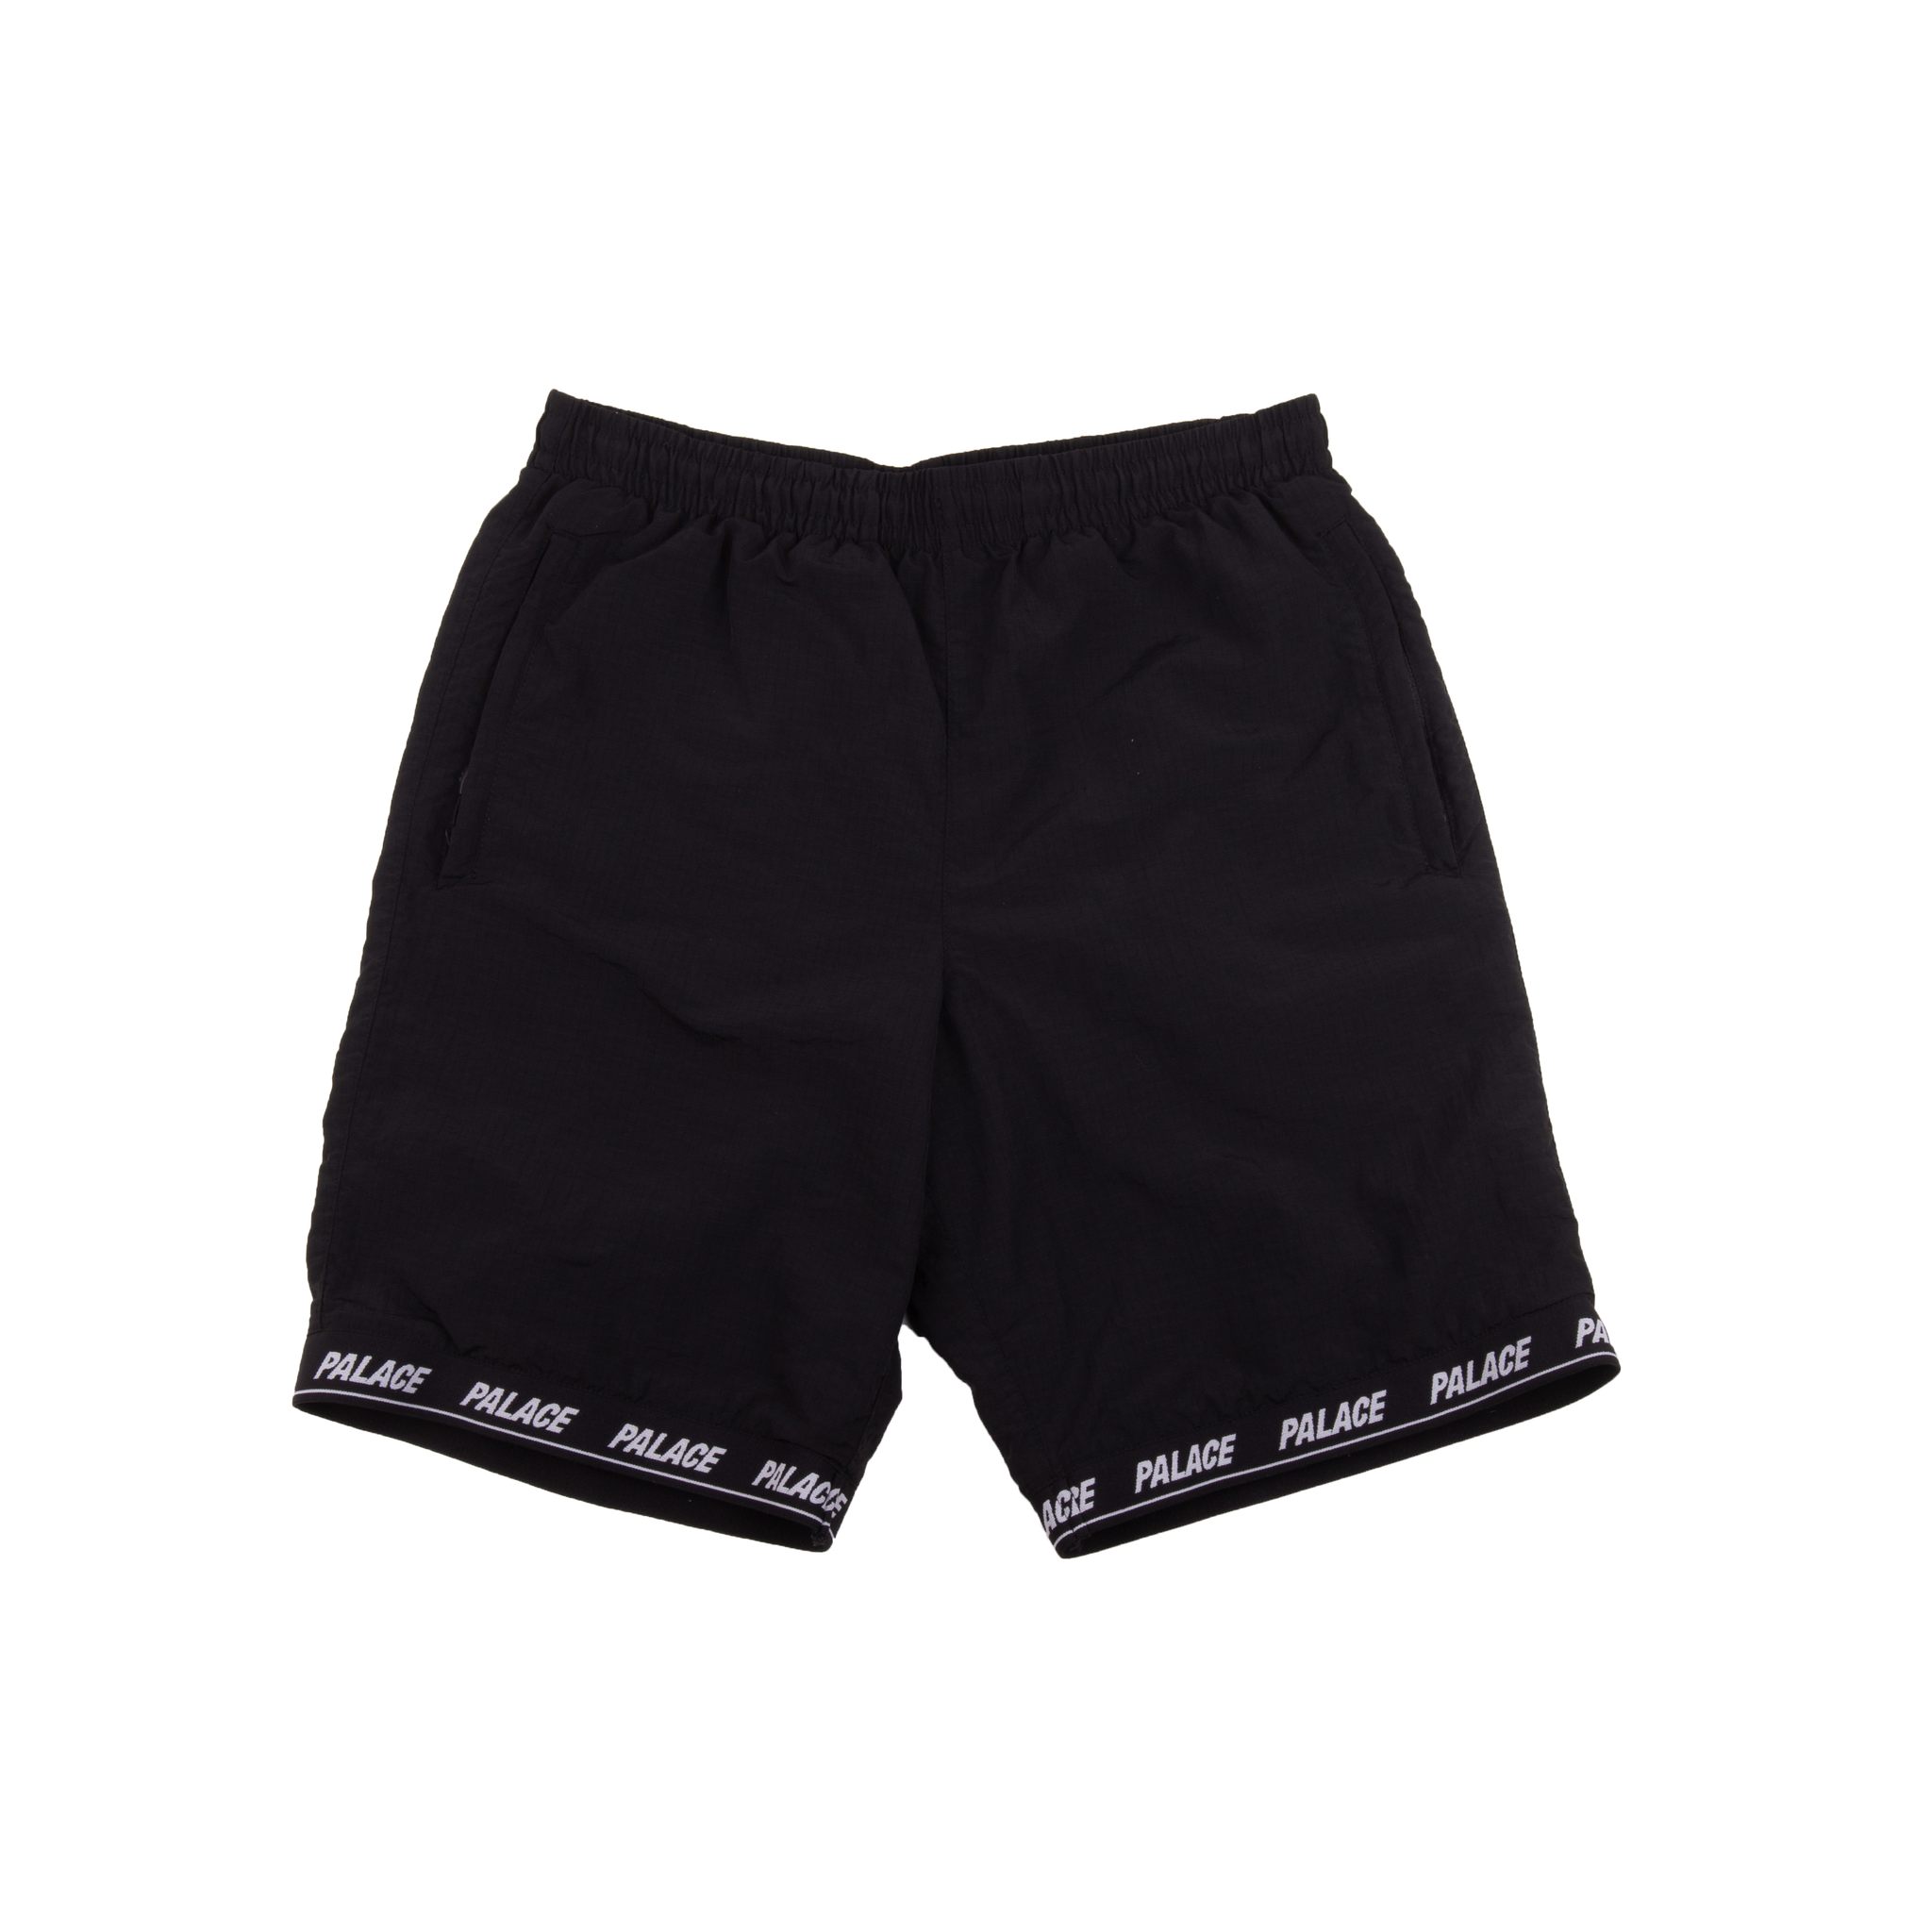 Palace Black Shell Shorts – On The Arm